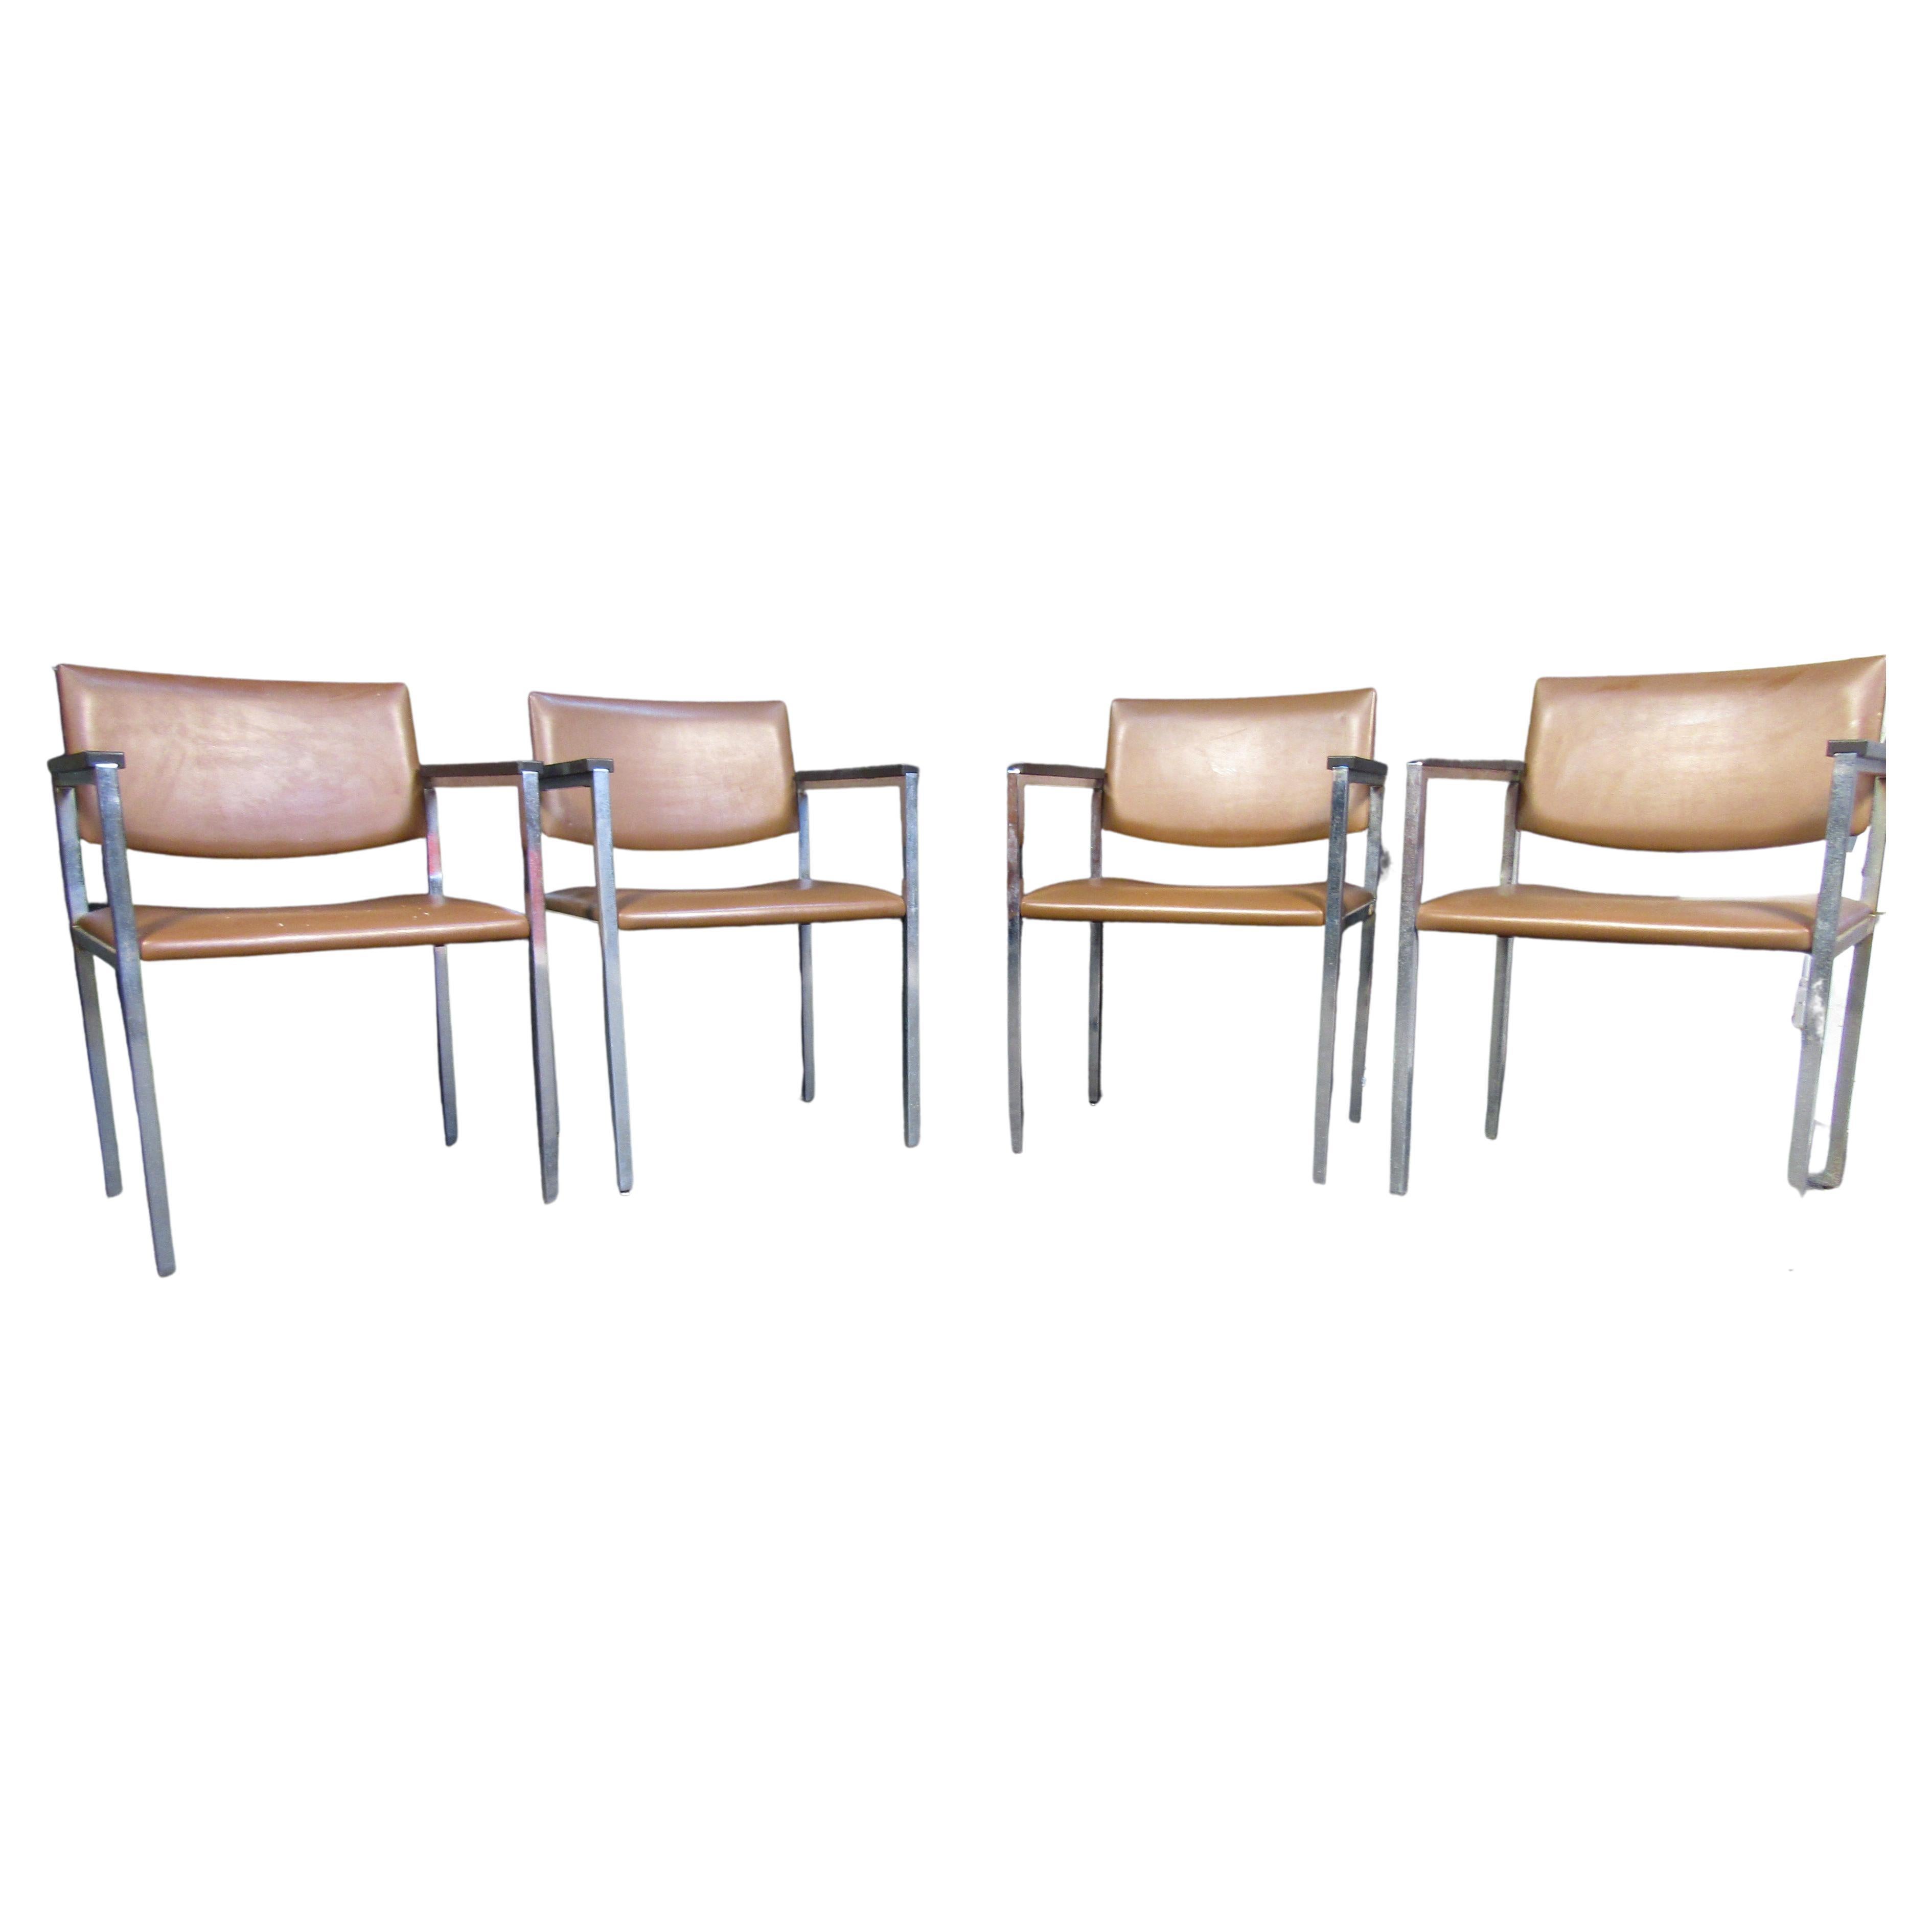 A minimal design made up of a chrome frame and brown vinyl seats allows these vintage chairs by Steelcase to be versatile in a range of settings. Made in the USA. Please confirm item location with seller (NY/NJ).